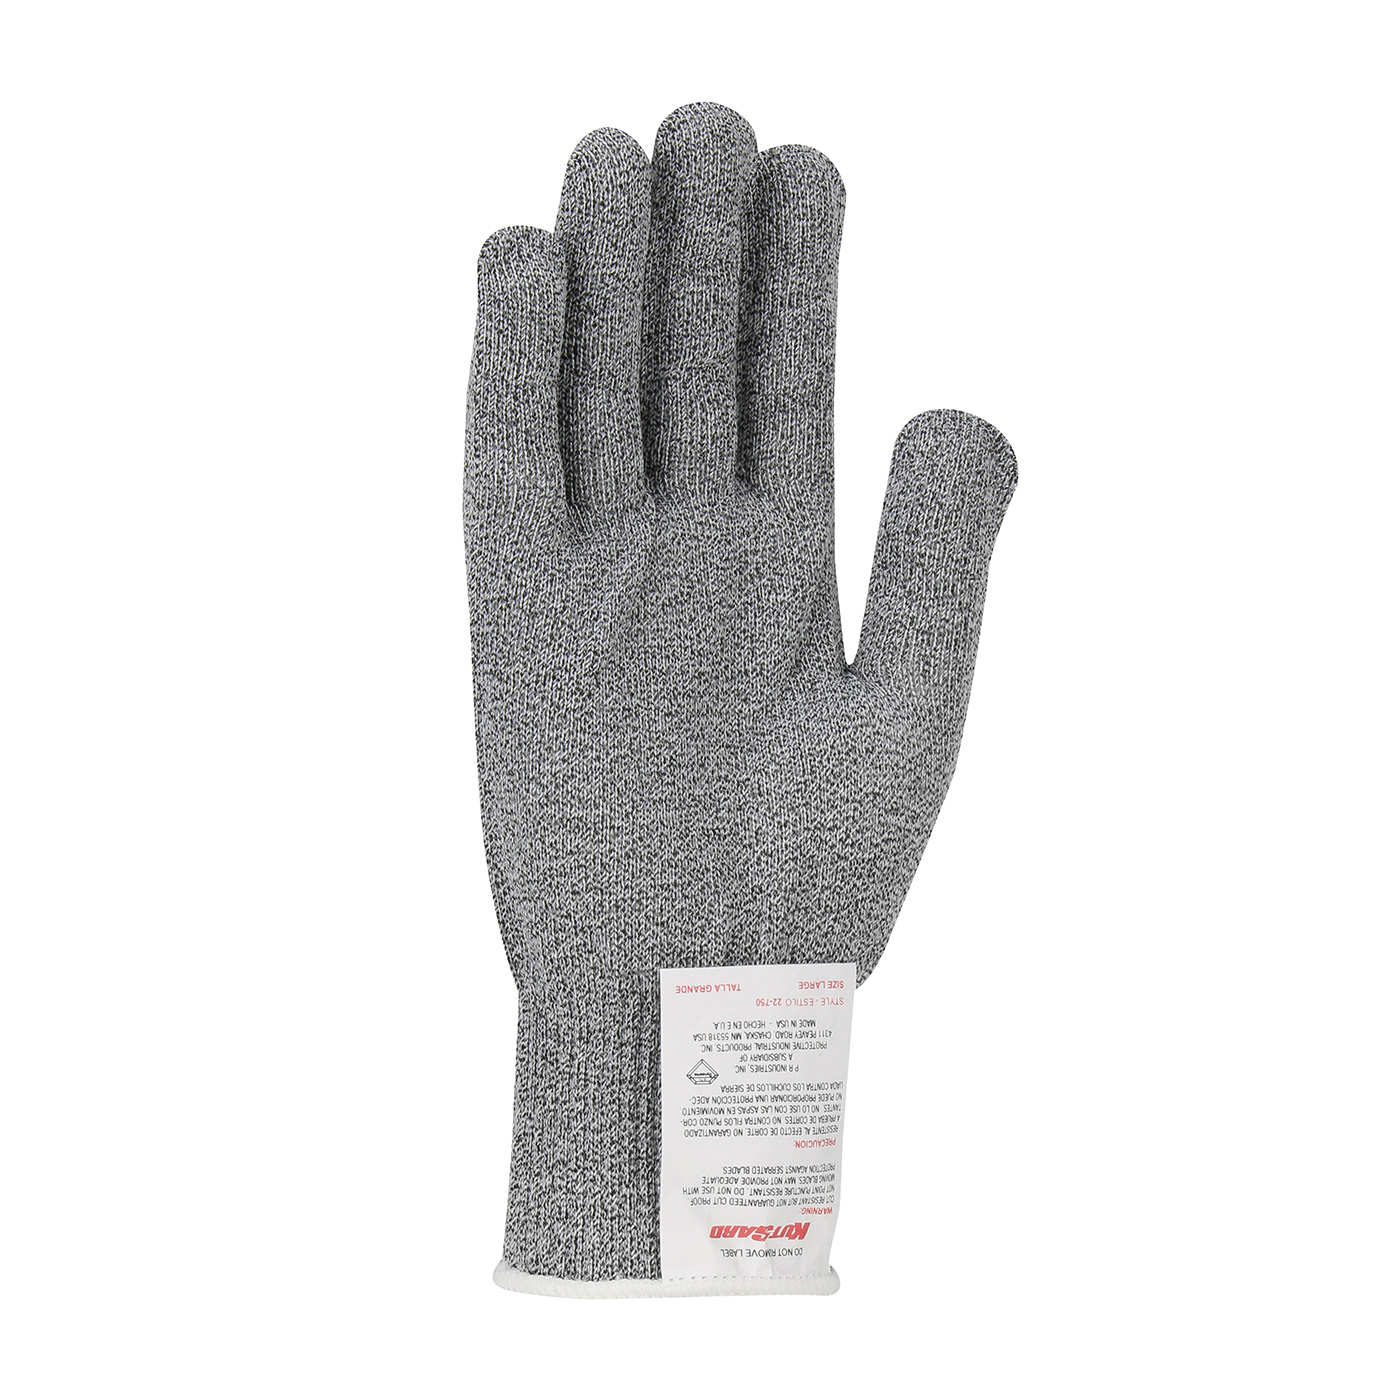 22-750G PIP® gray Claw Cover® Seamless Knit Dyneema® Blended Antimicrobial Glove - Light Weight